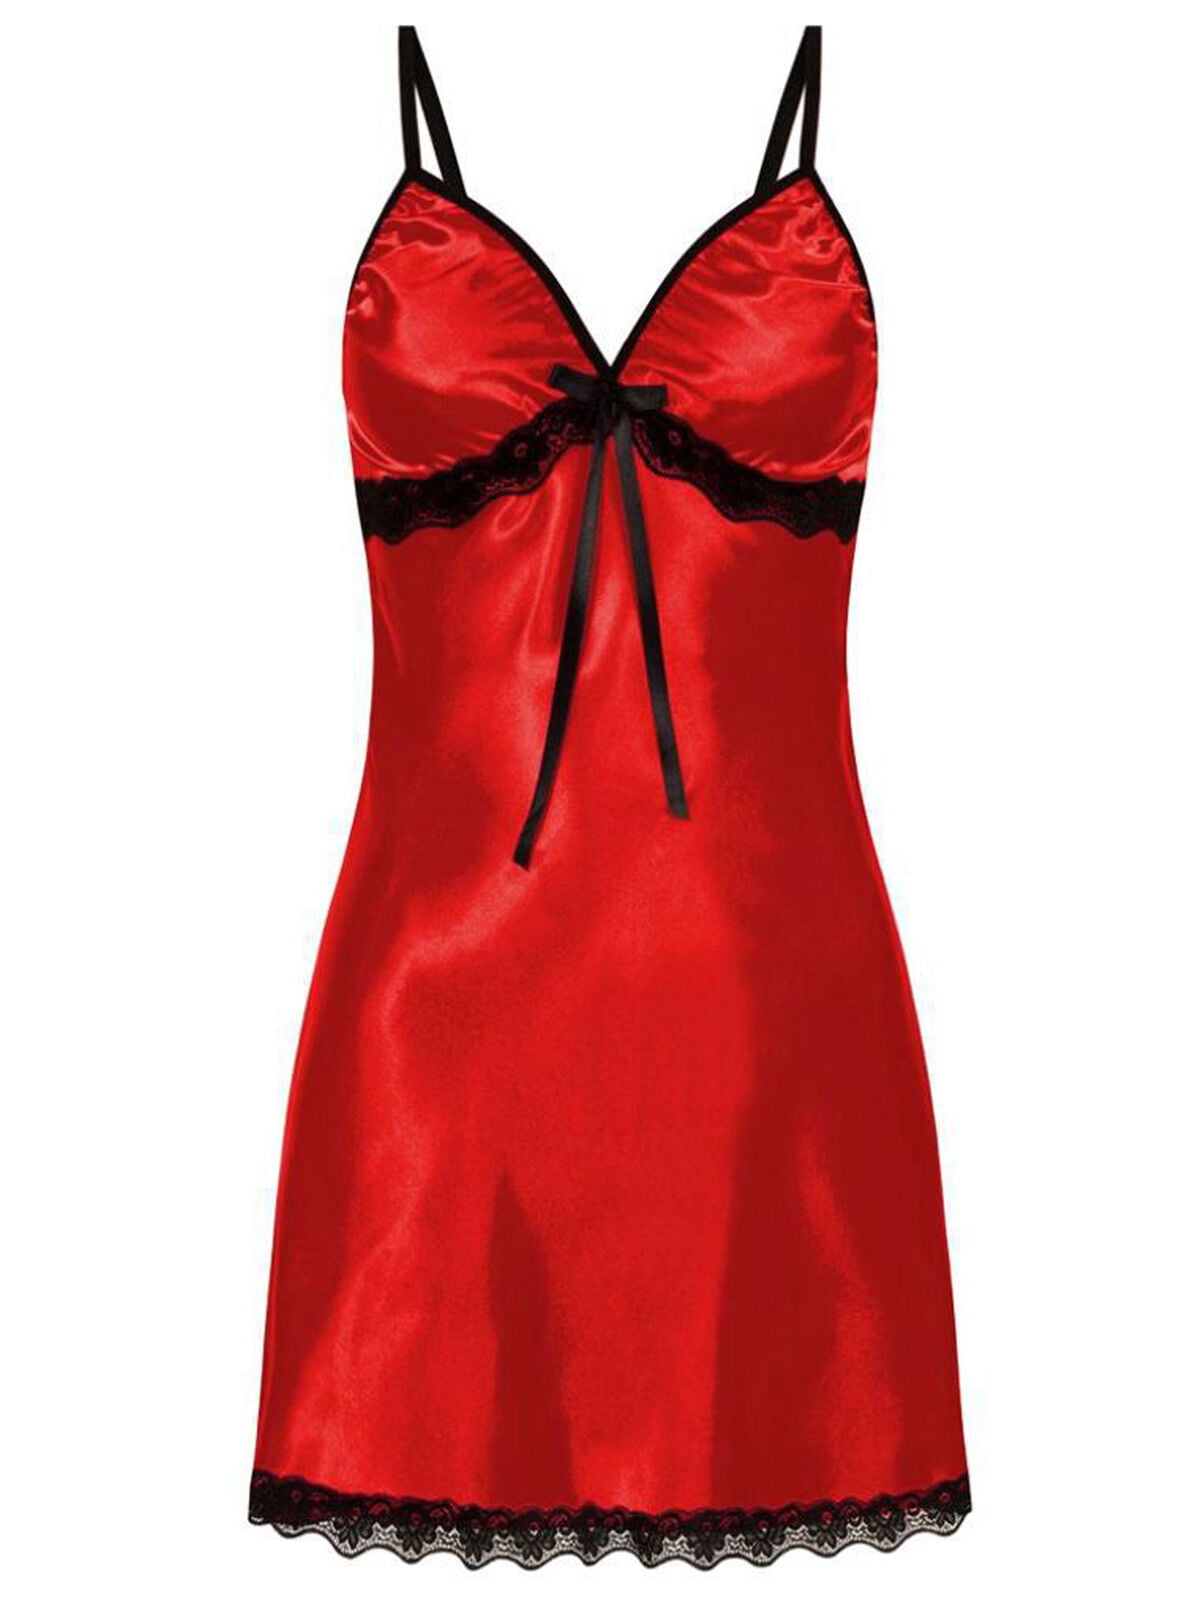 Up2Date Plus Size Red Burgundy Elegant Satin High/Low Style Chemise NWT 2X or 3X 